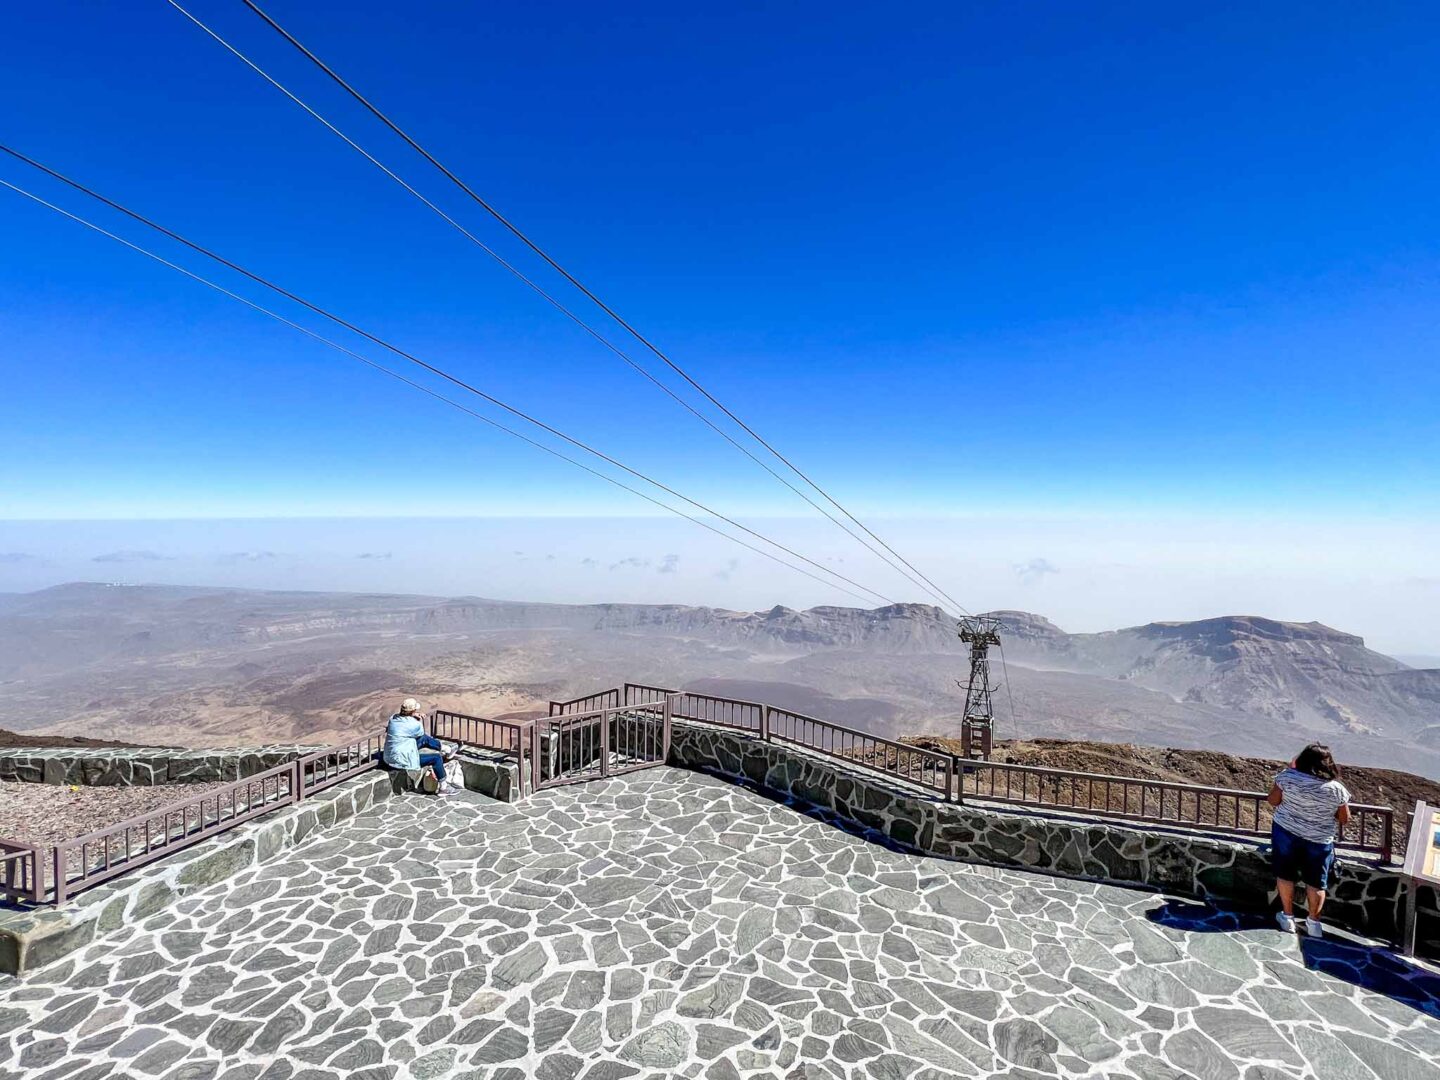 The Wandering Quinn Travel Blog Tenerife road trip, Mount Teide Cable Car viewing platform at the top